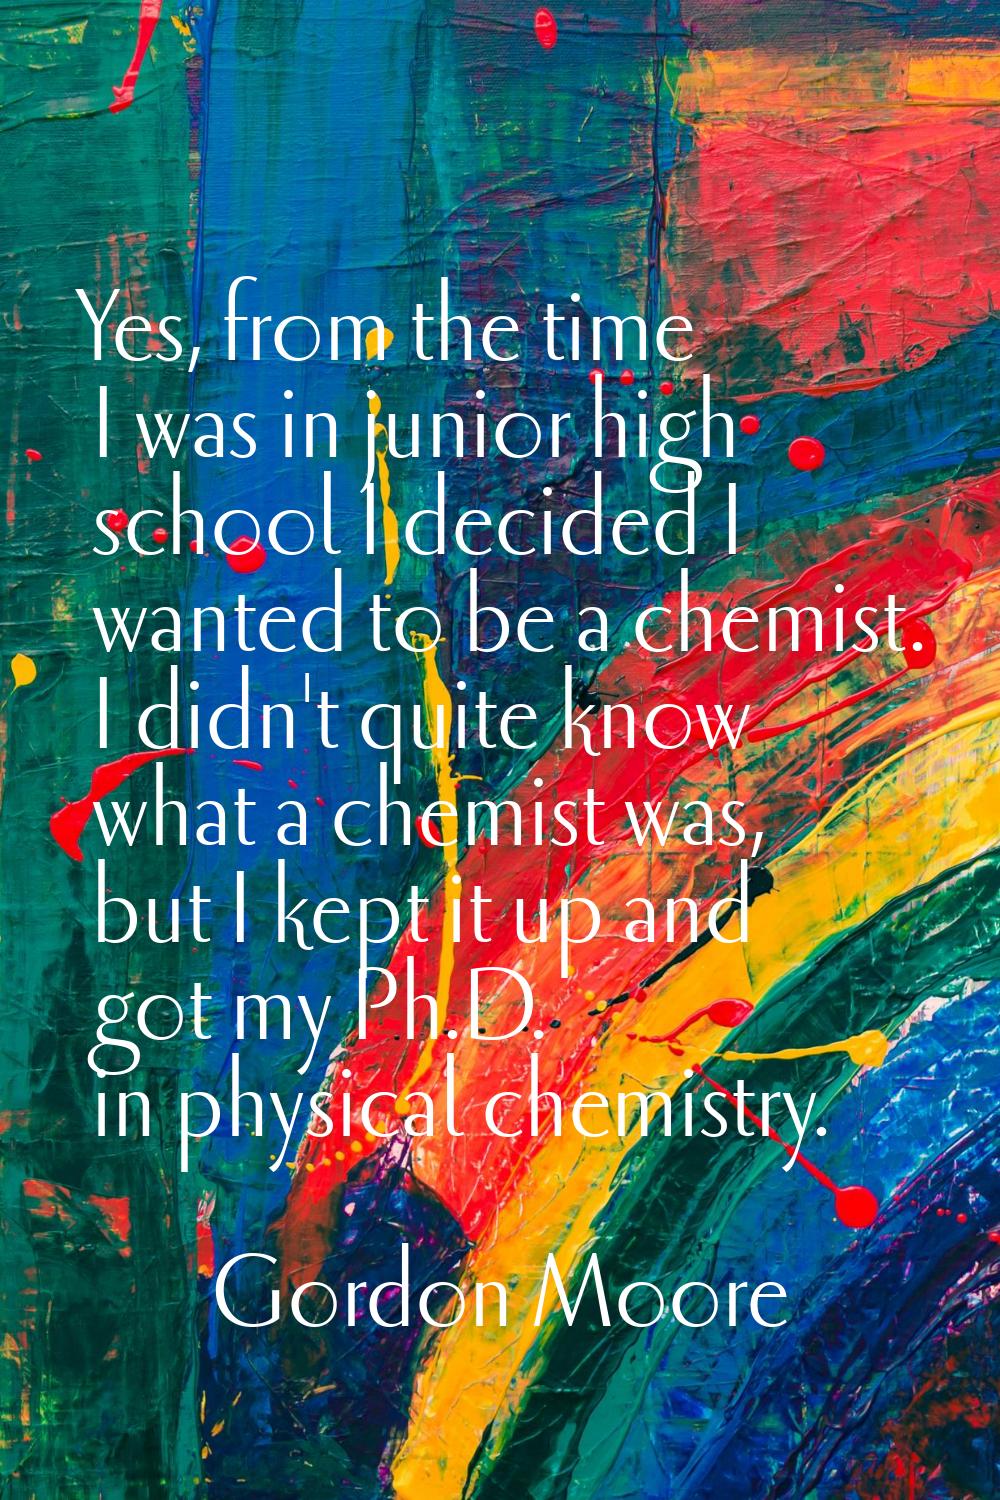 Yes, from the time I was in junior high school I decided I wanted to be a chemist. I didn't quite k